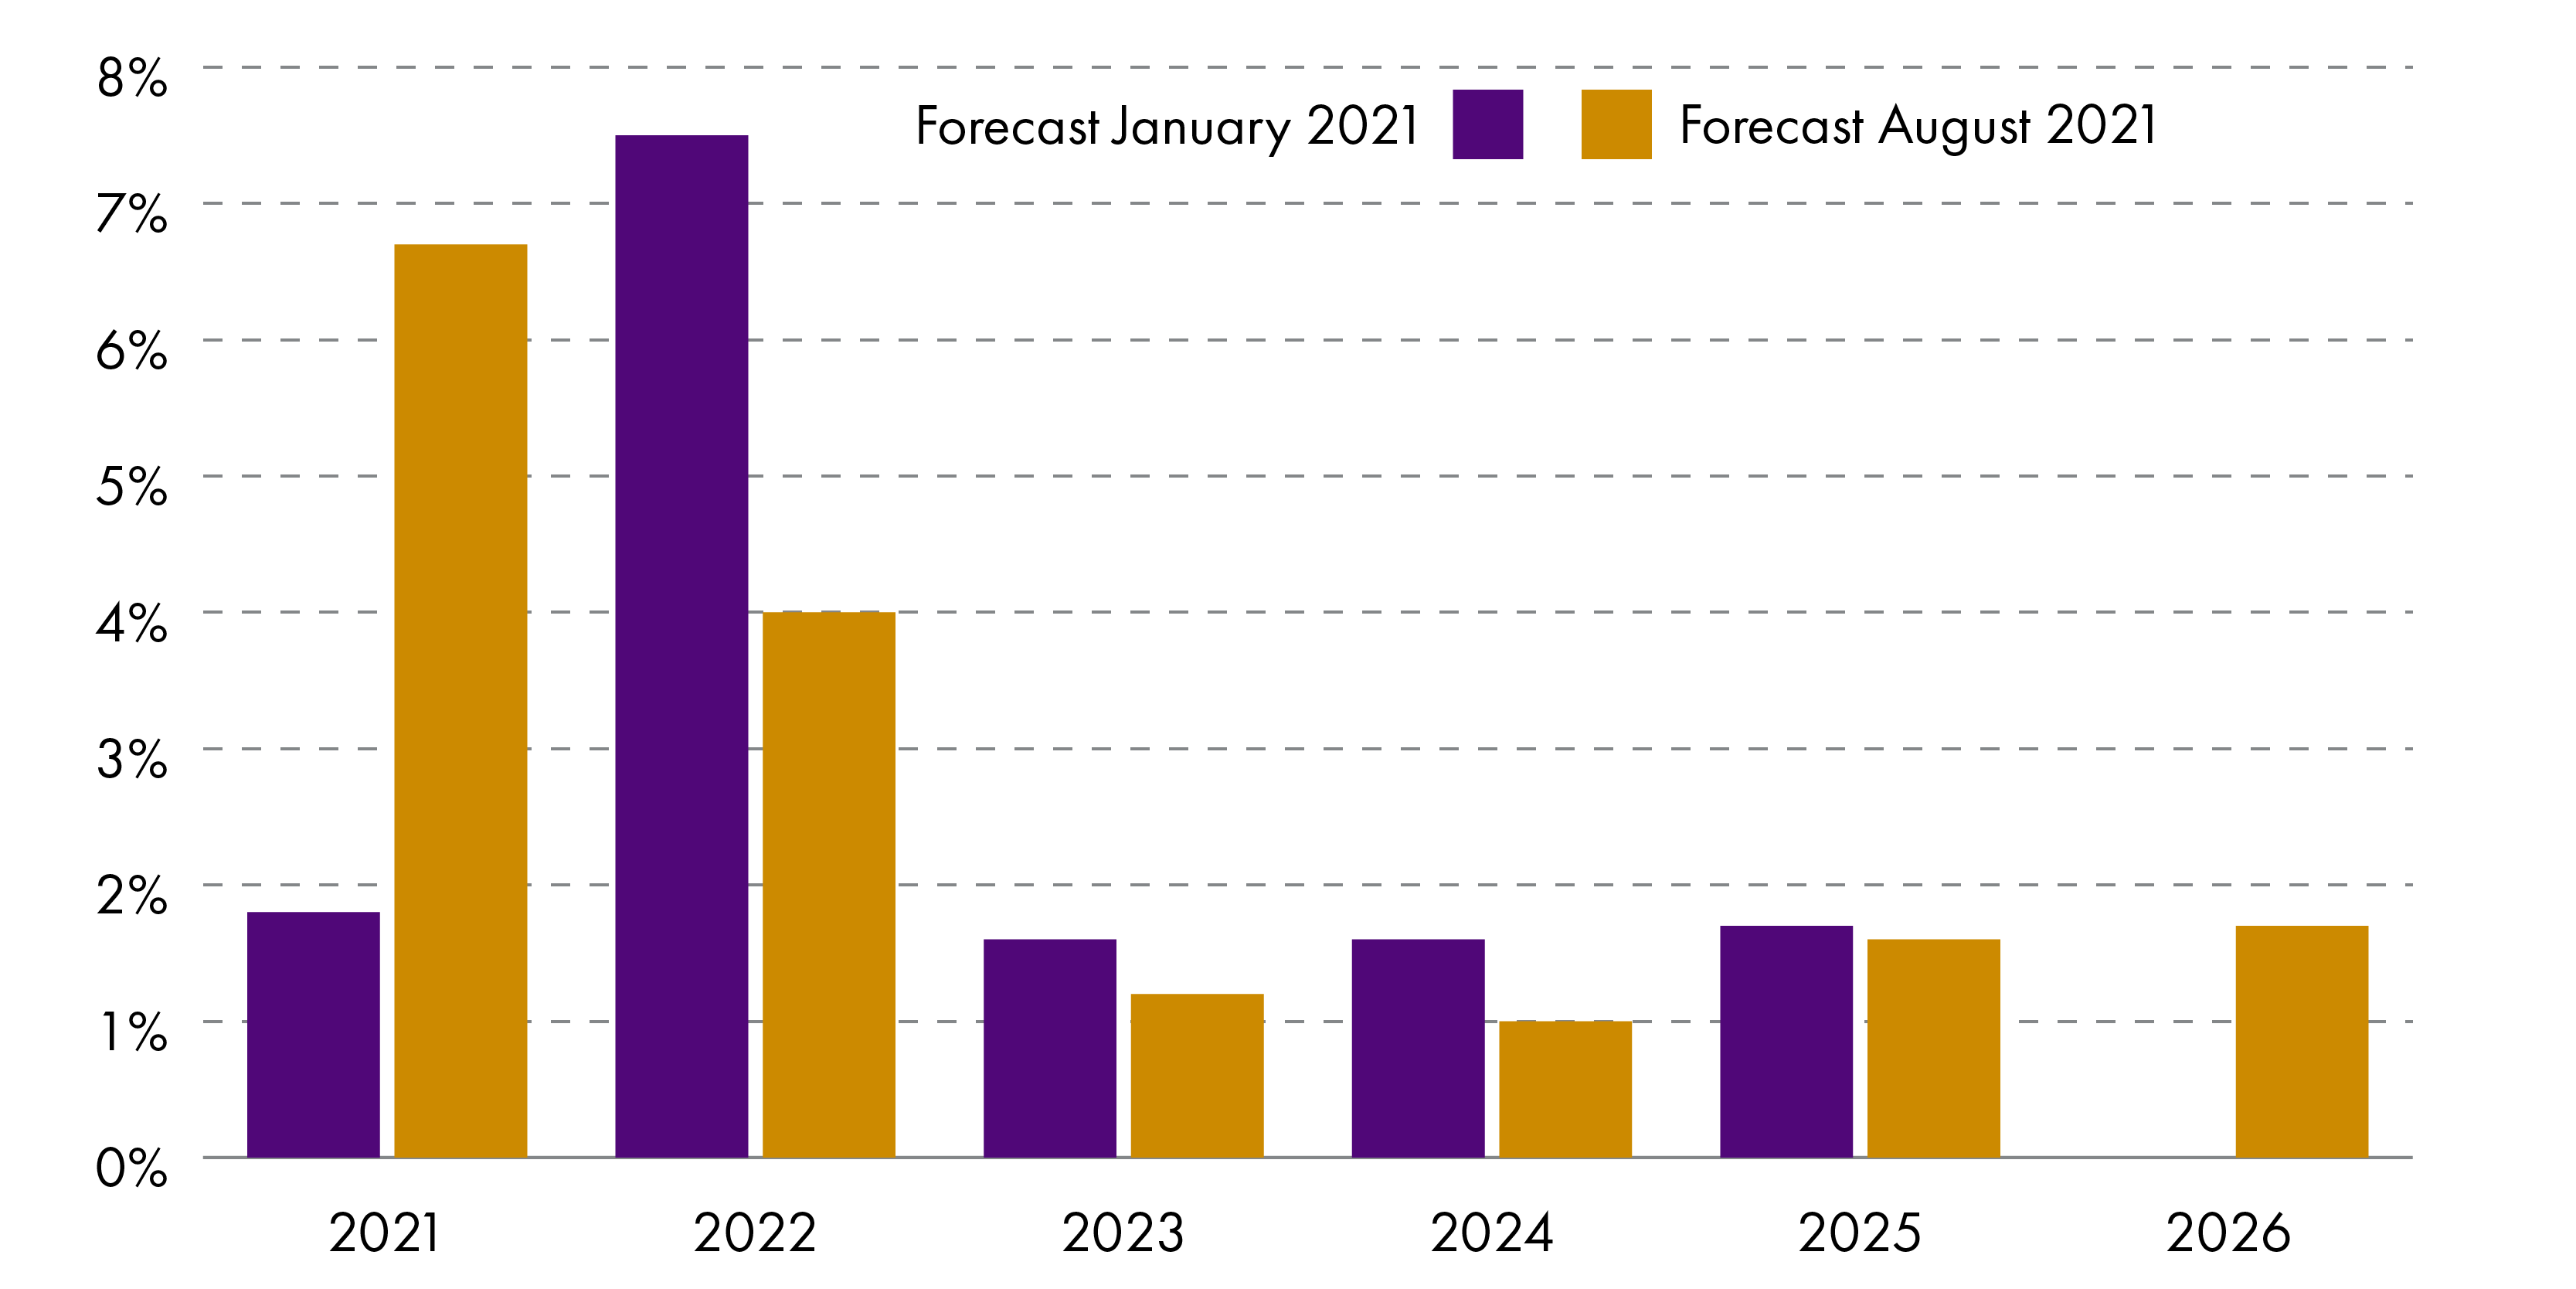 Figure 2 shows how the Scottish Fiscal Commission forecasts published in August 2021 show lower GDP growth for Scotland in 2022 to 2025 that the SFC's previous forecasts published in January 2021.